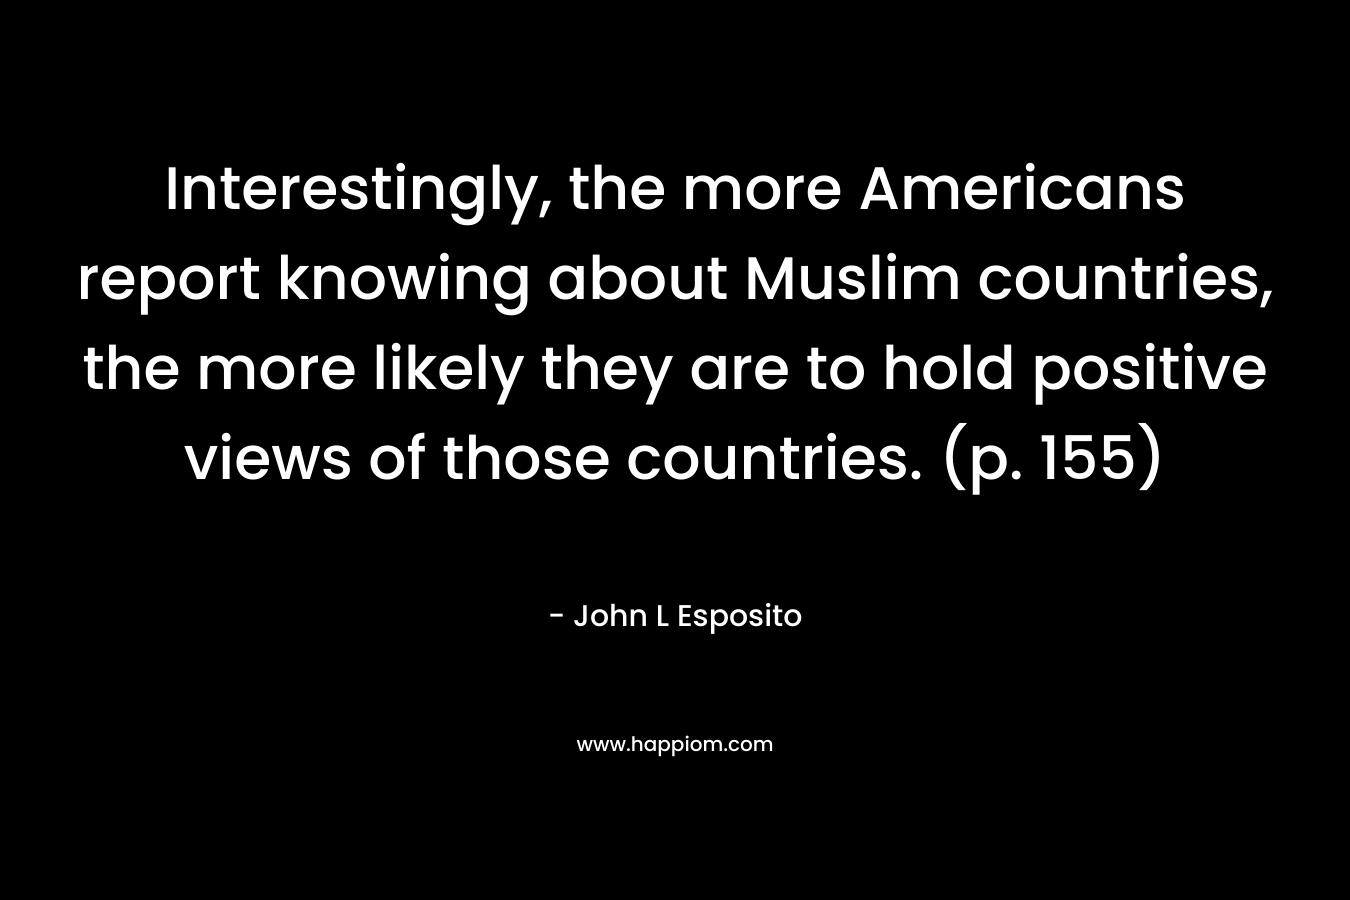 Interestingly, the more Americans report knowing about Muslim countries, the more likely they are to hold positive views of those countries. (p. 155) – John L Esposito